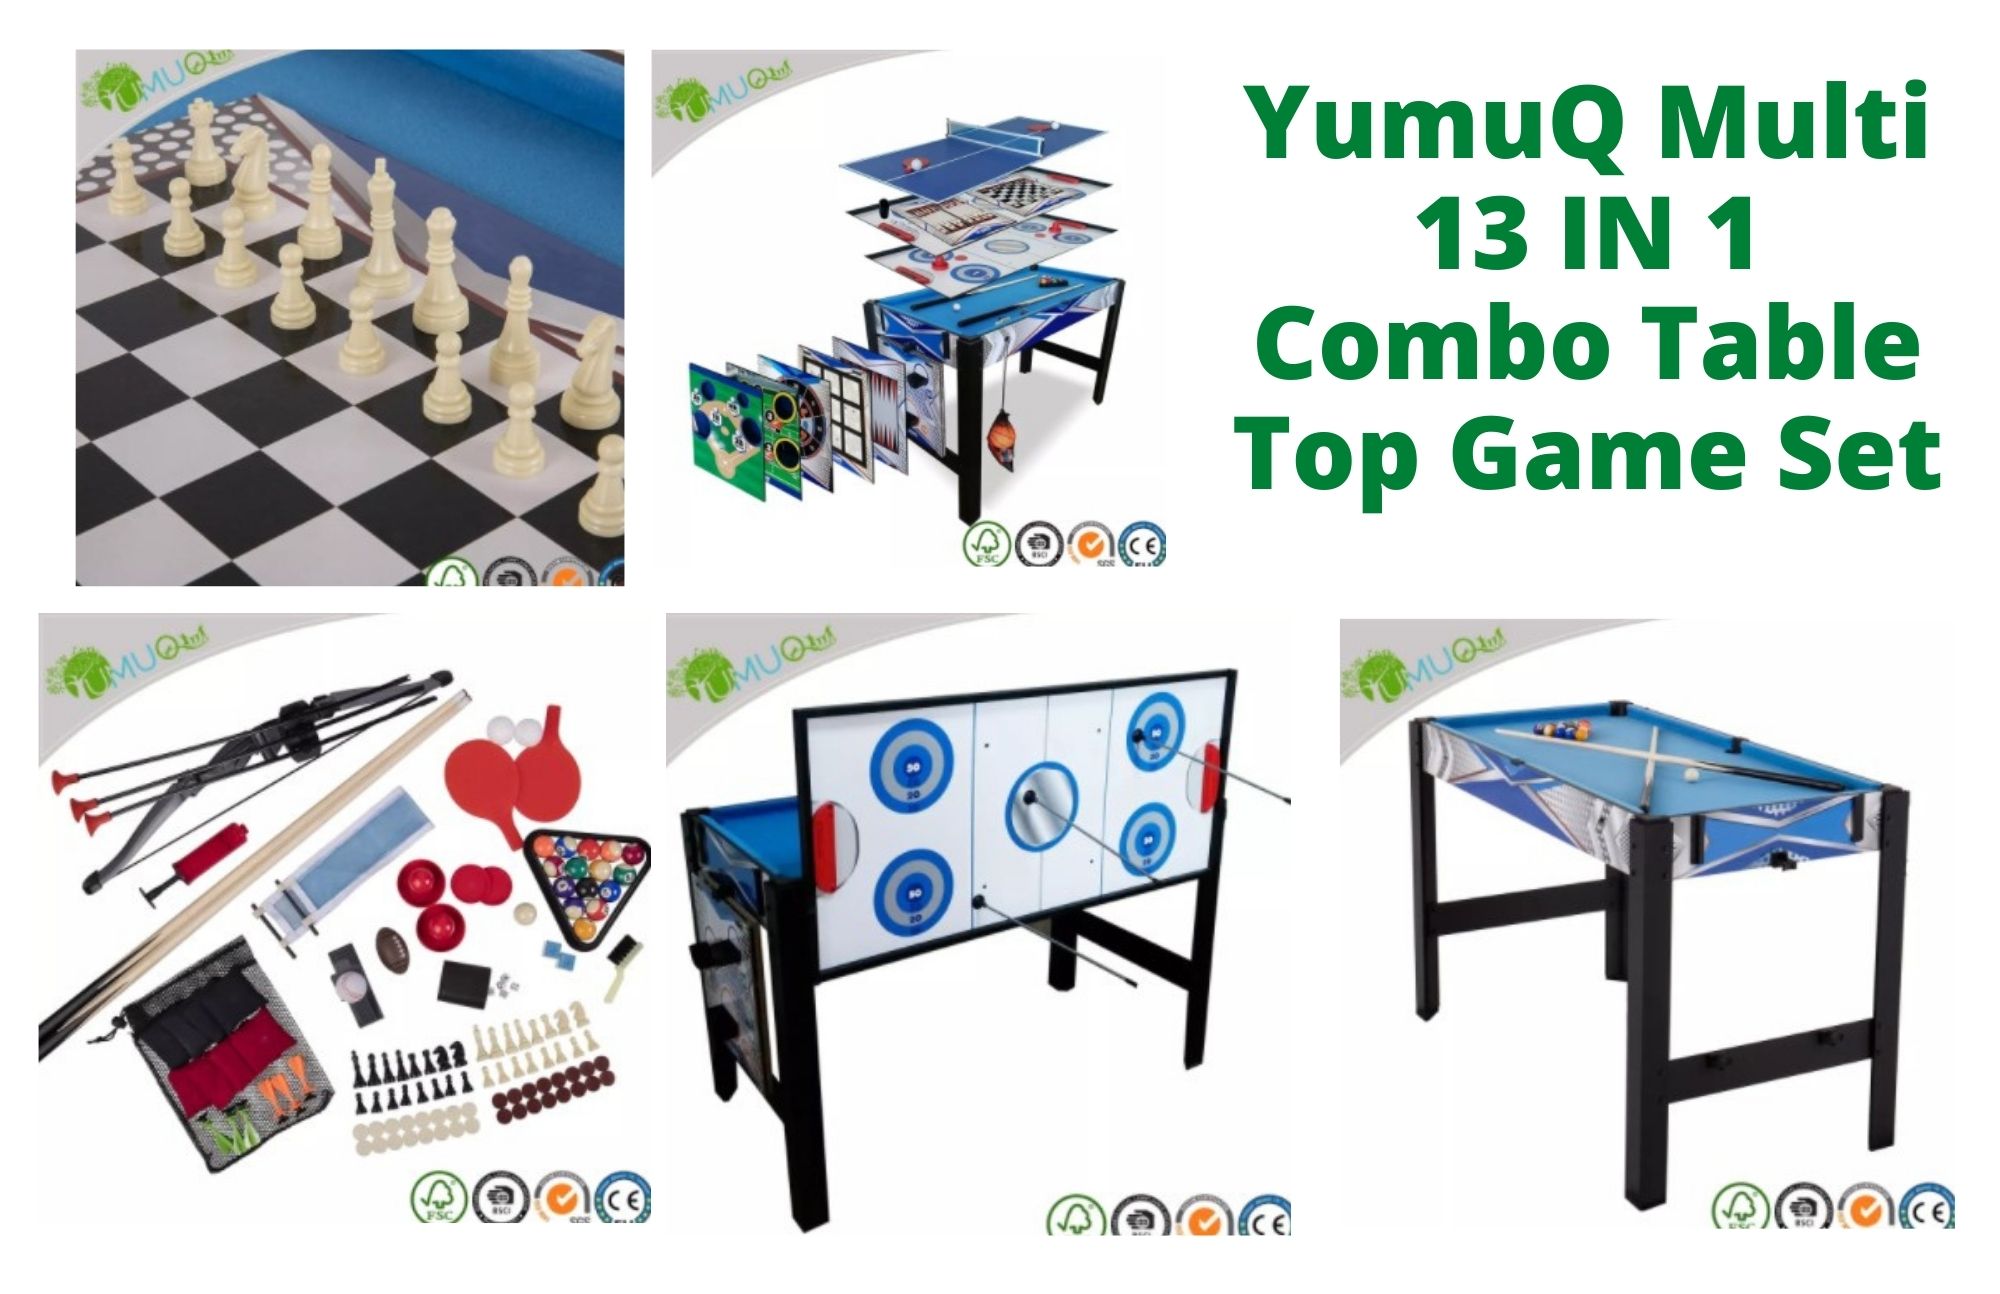 YumuQ Multi 13 In 1 Combo Table Top Game Set offers 13 games in one table such as Chess, soft tip darts, checkers, archery, backgammon and many more